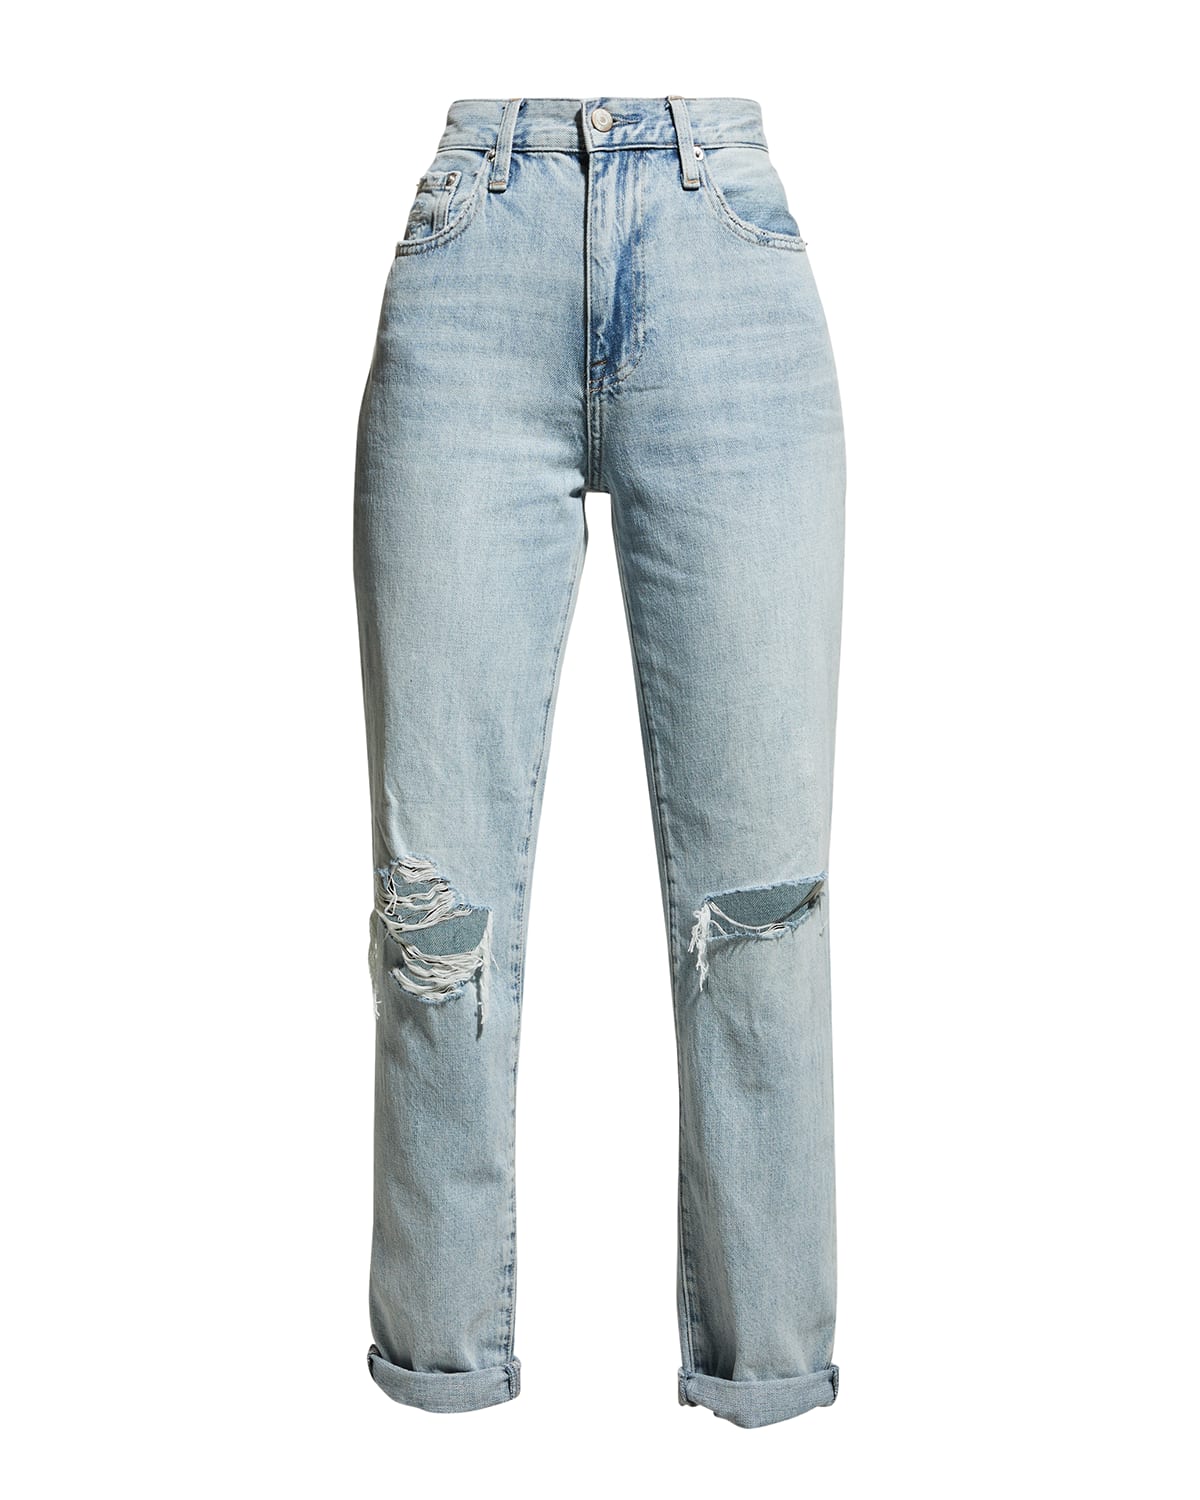 Dsquared2 Boston Embellished Jeans | Neiman Marcus